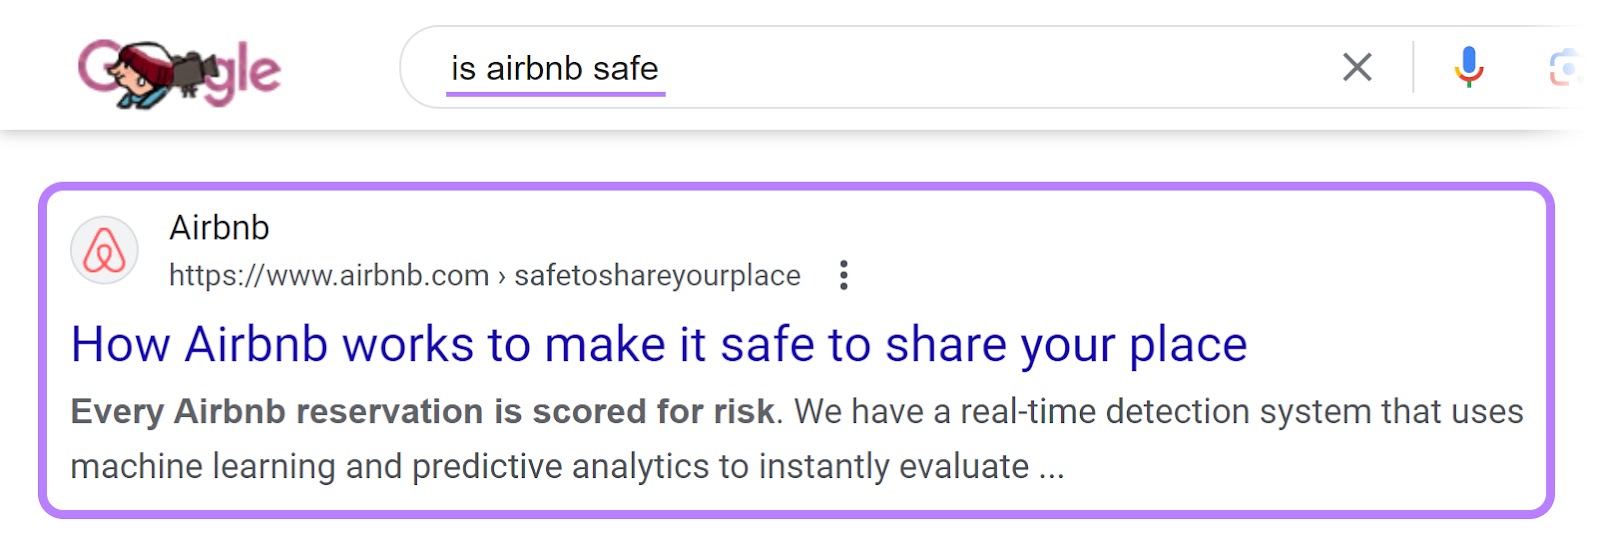 Airbnb's article on Google SERP for “is airbnb safe" query